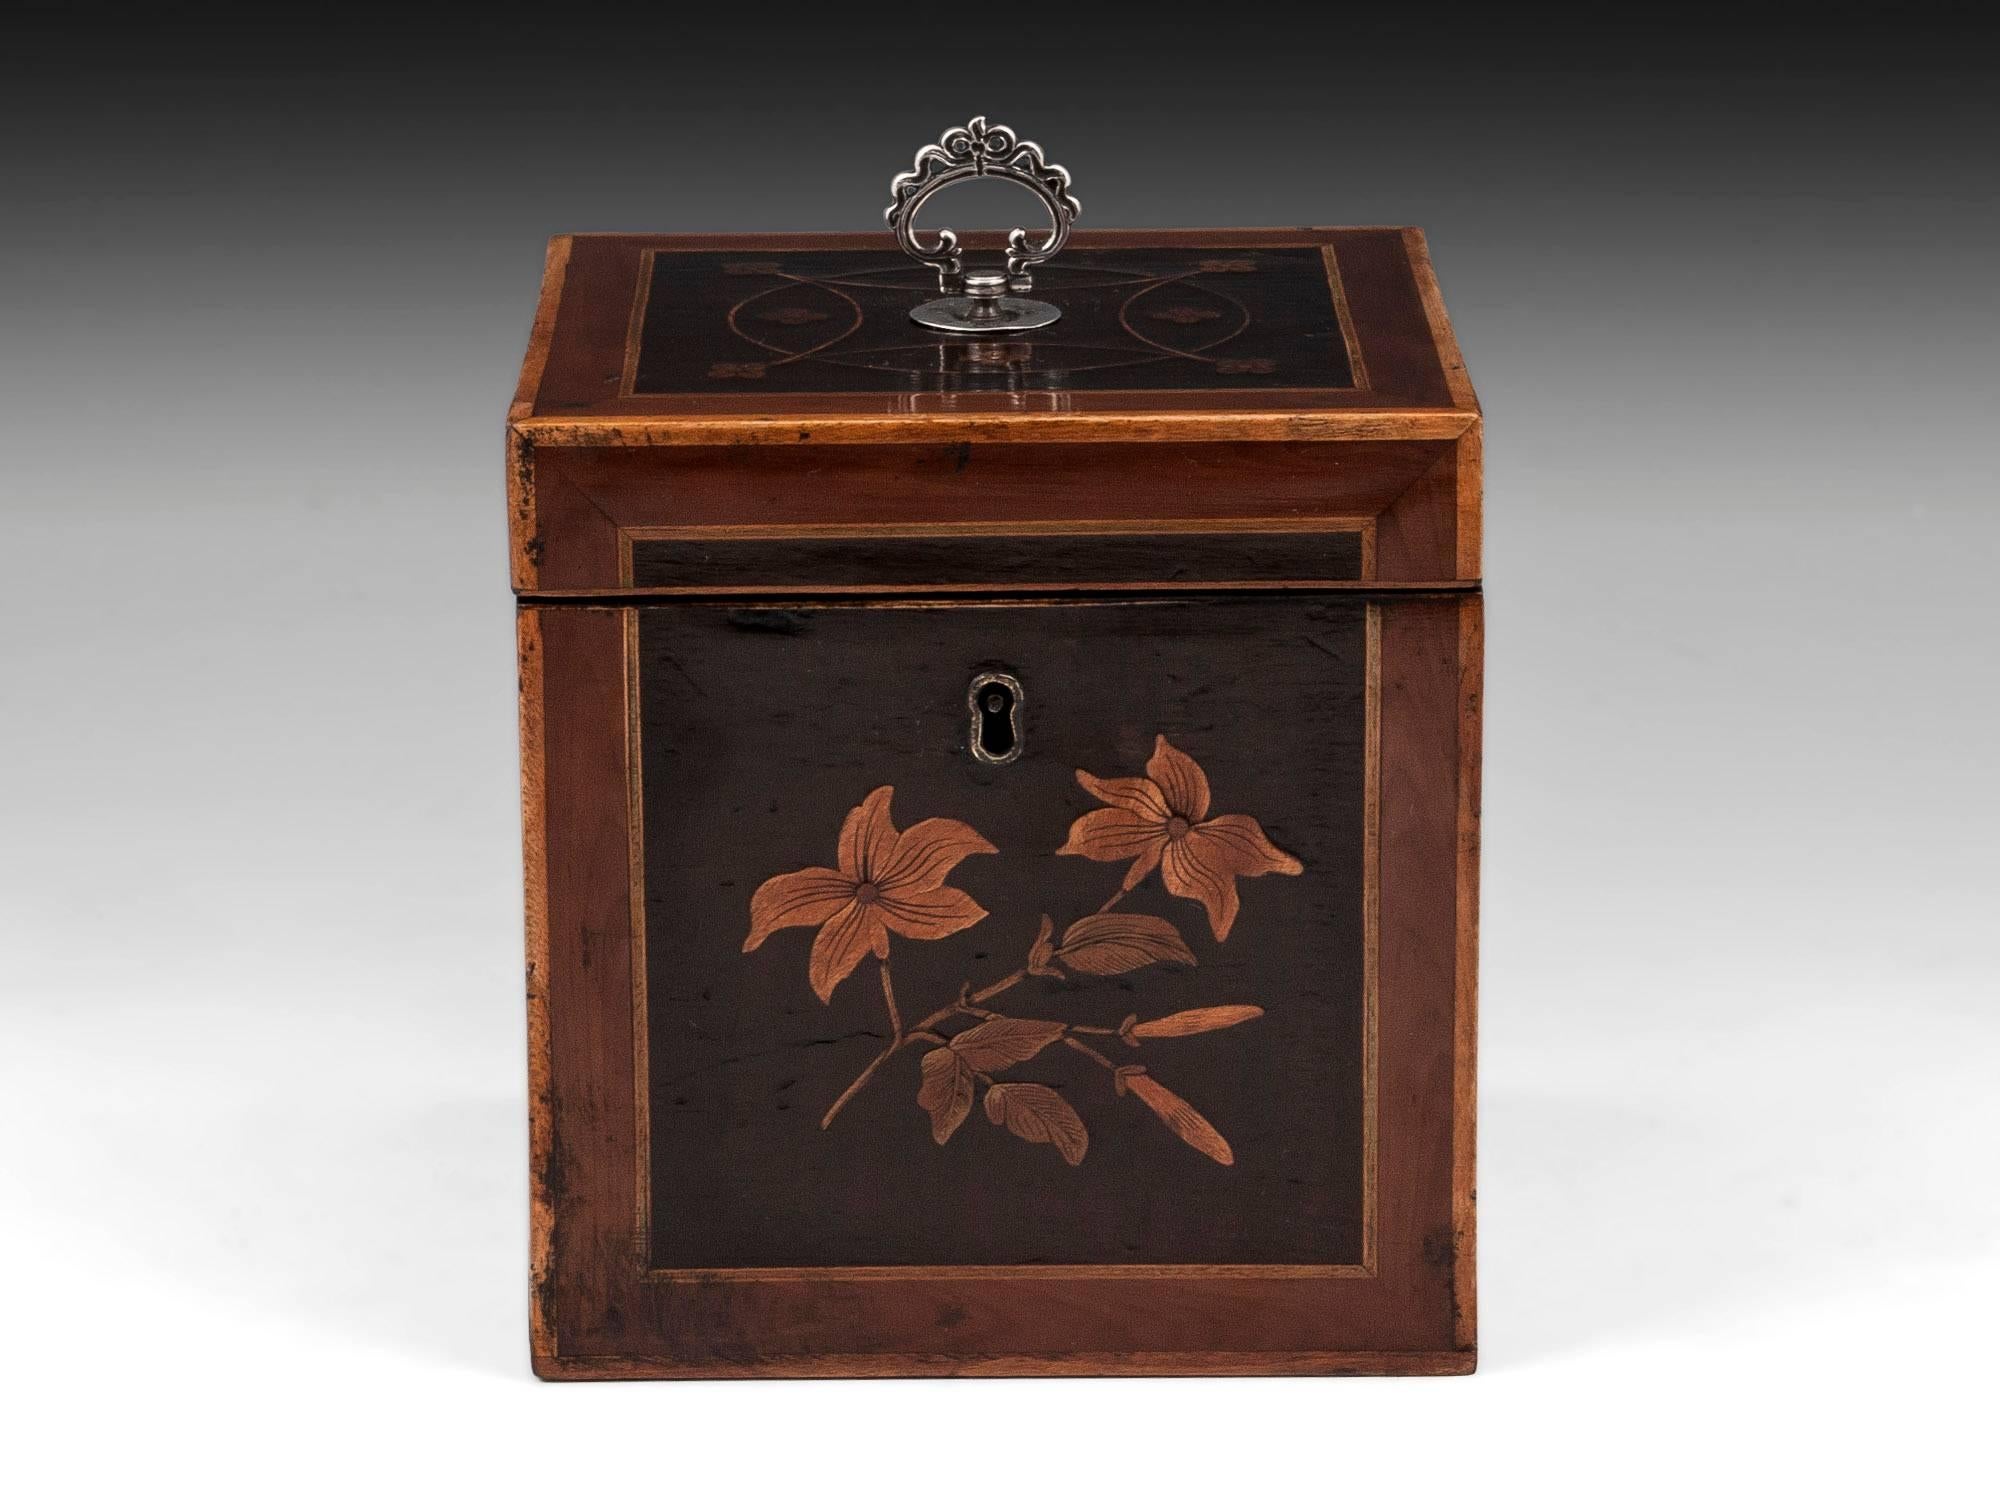 Antique tea caddy with boxwood edges and panels on each side with minimalistic inlaid flowers and unique strung design to the top finished with an ornate sterling silver handle. 

The tea caddies interior features a floating lid and traces of the